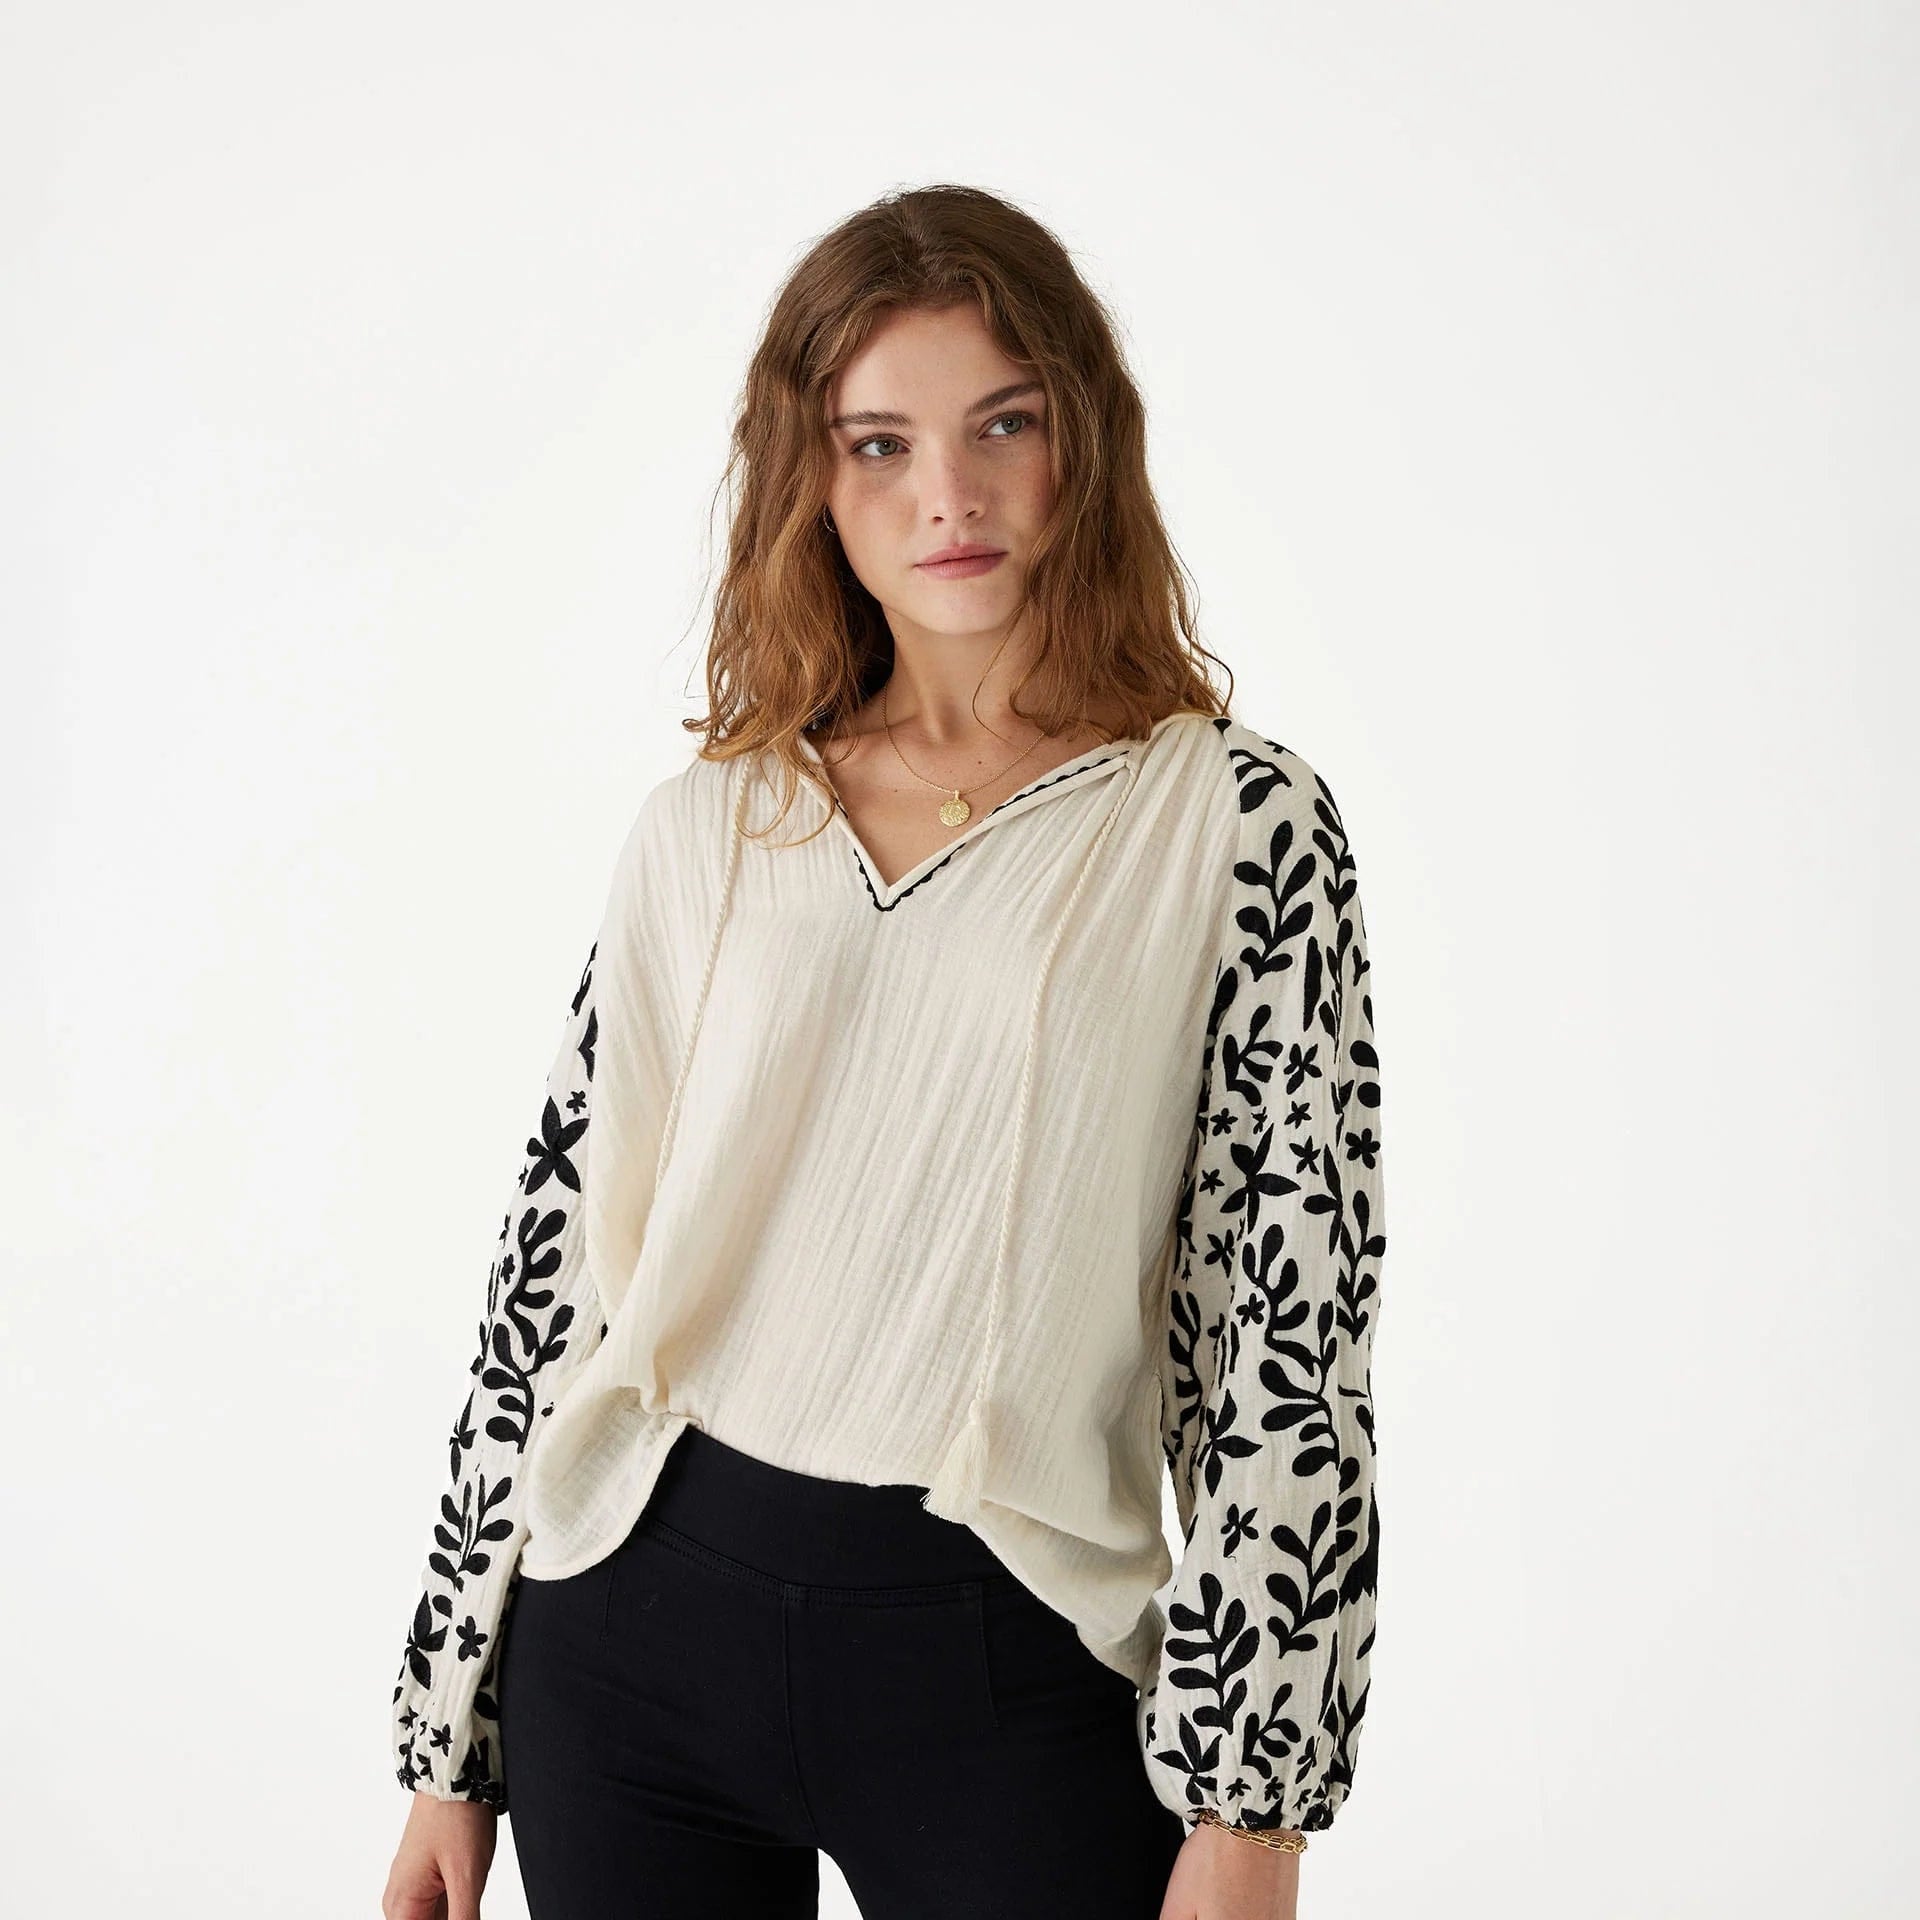 Mersea Women's Shirts & Tops Mersea Palermo Embroidered Blouse